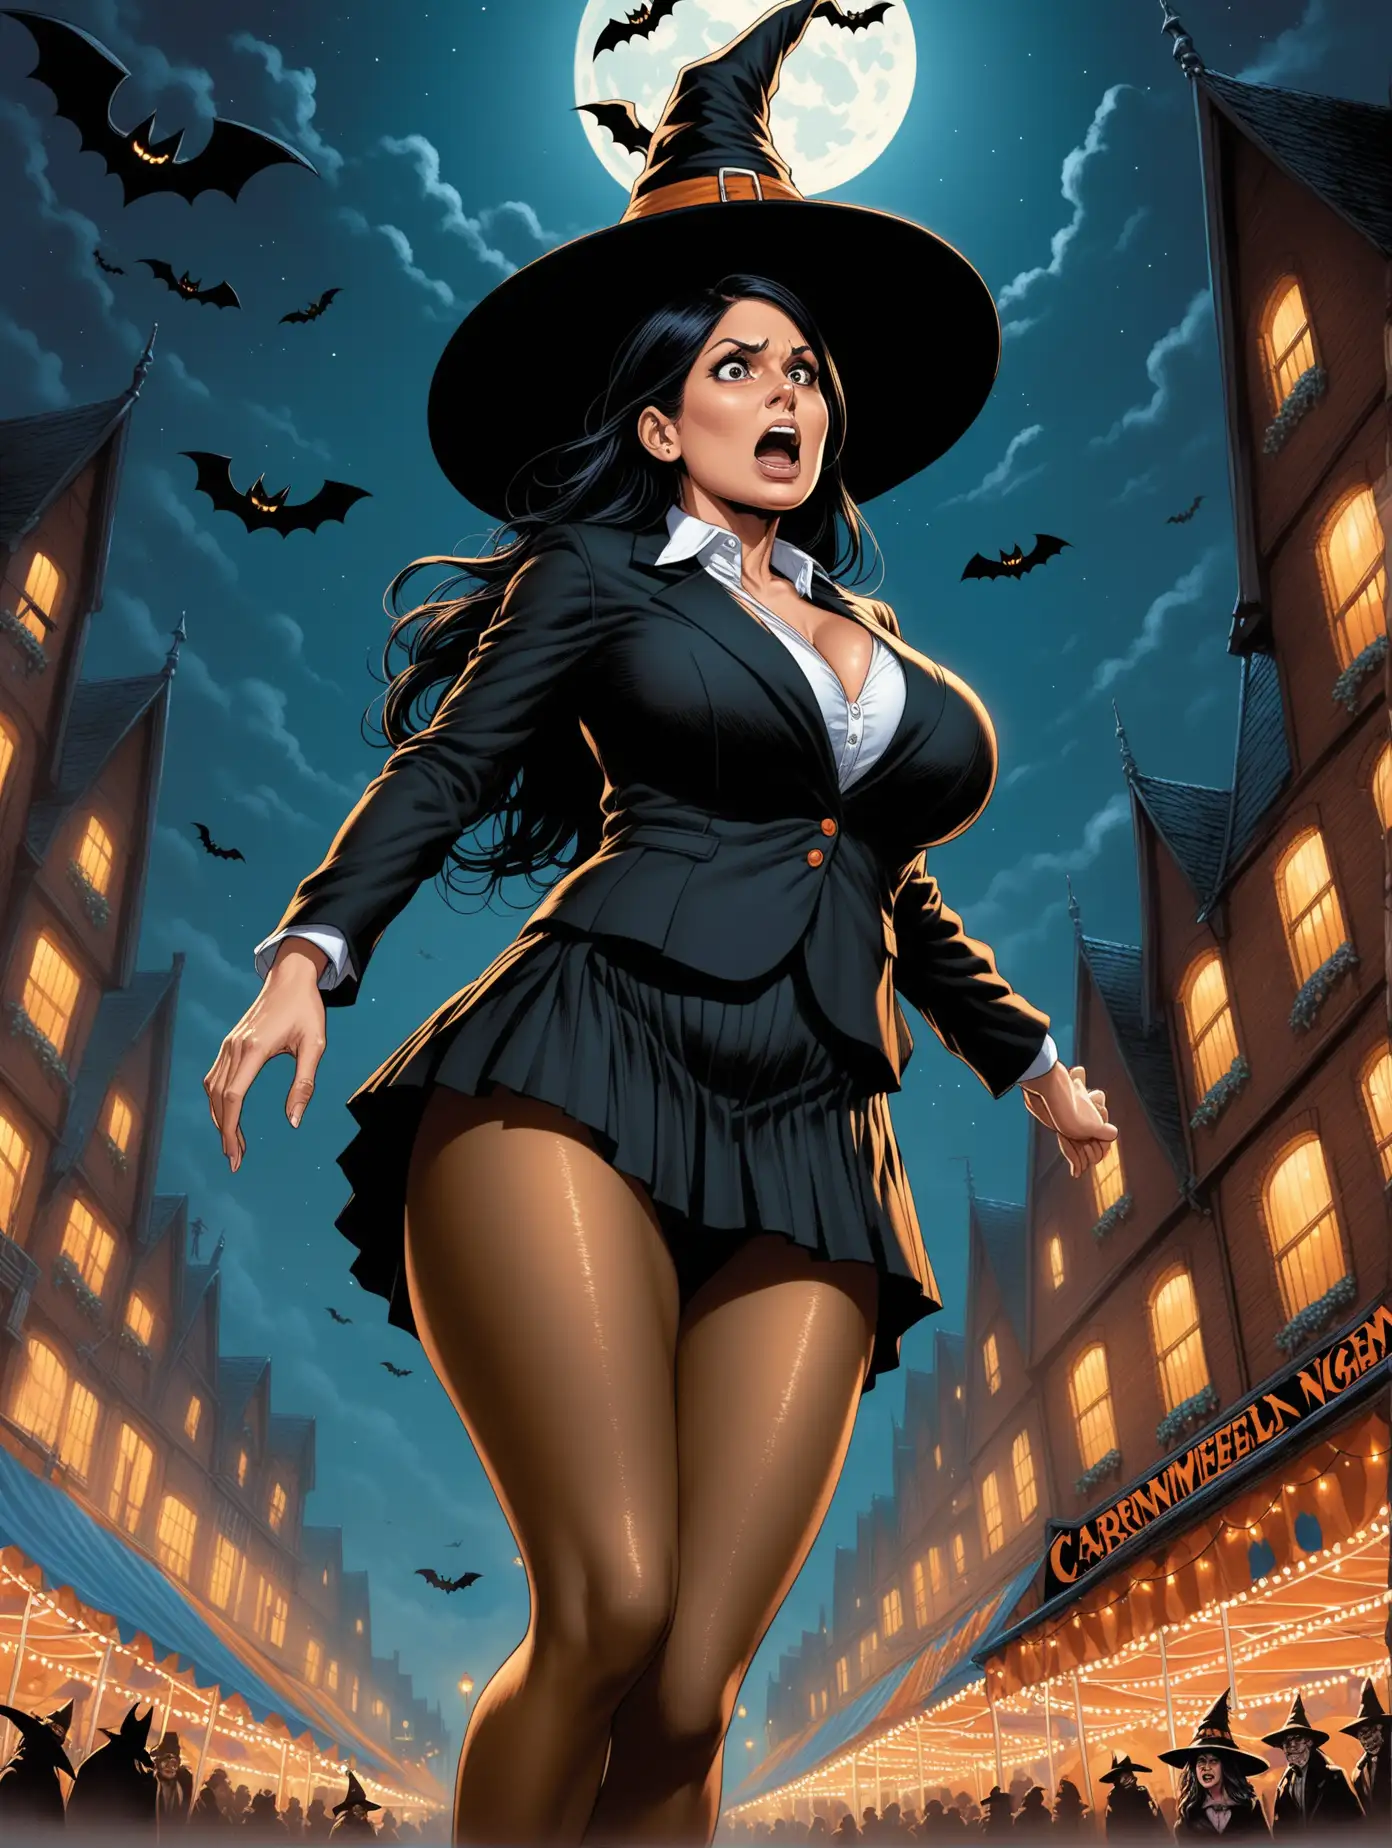 Mature Priti Patel in Witch Costume at Carnival Detailed Bernie Wrightson Art Style